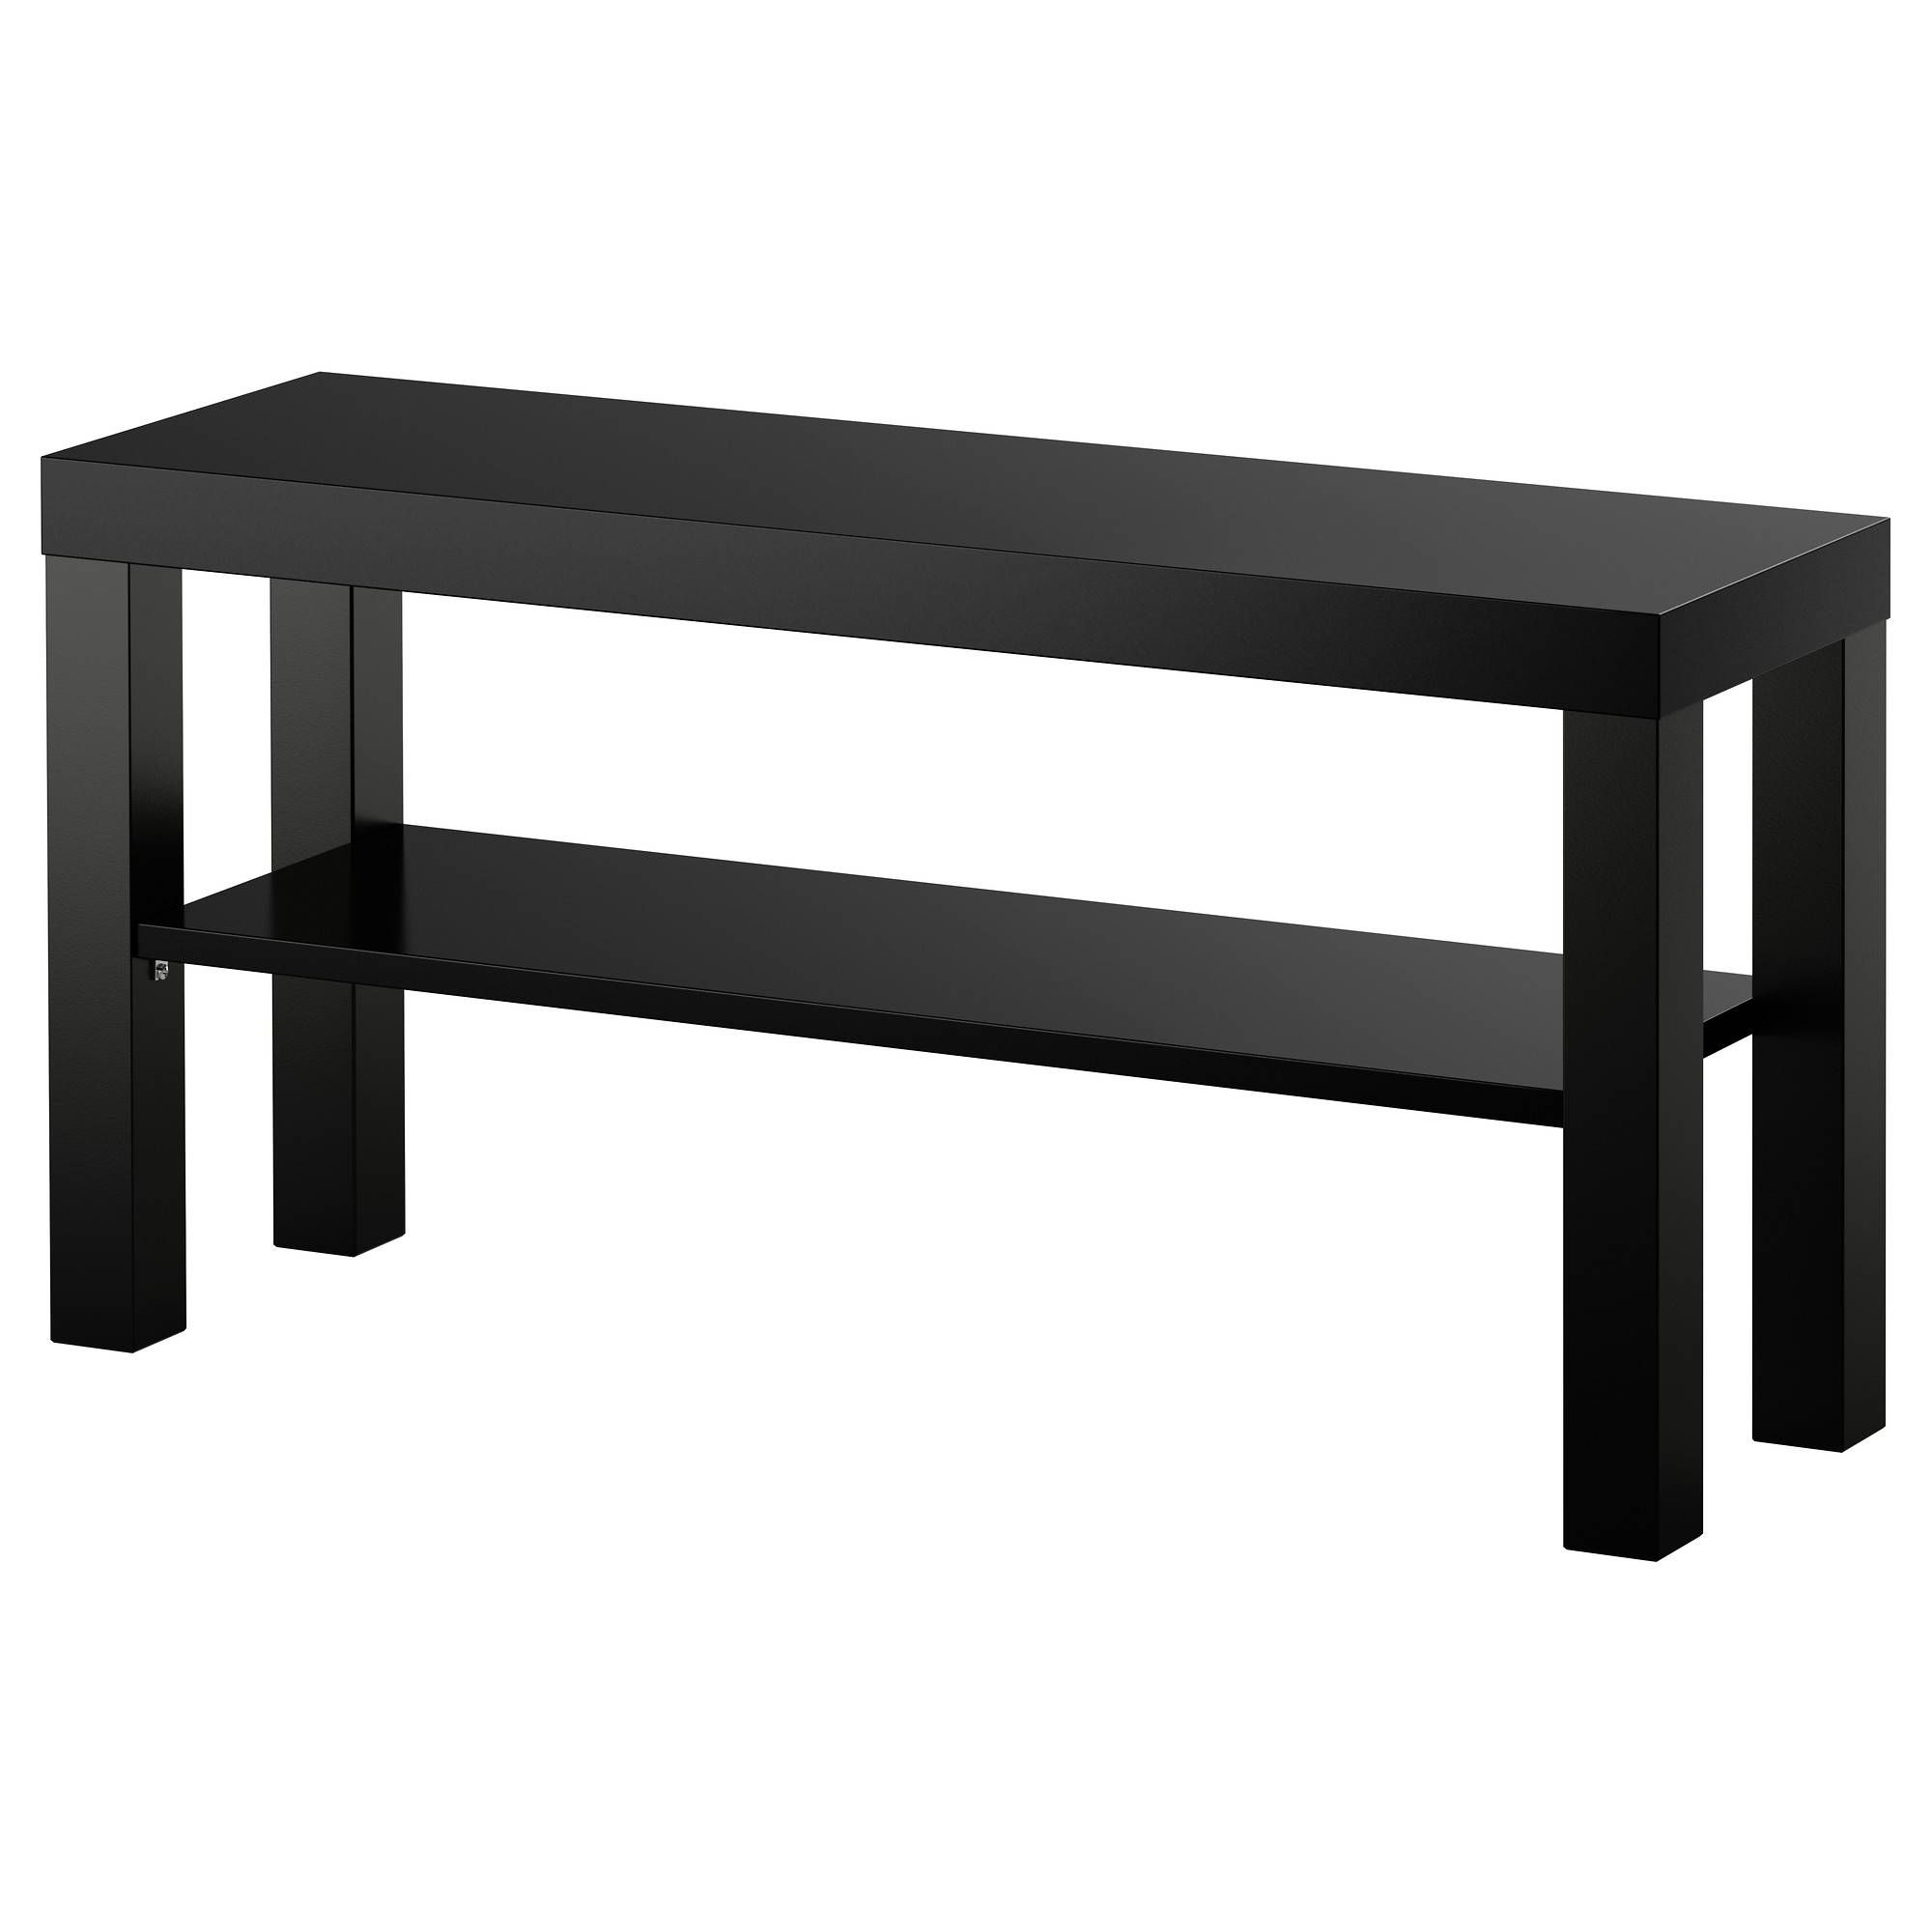 Lack Tv Bench Black 90x26 Cm – Ikea Intended For Tv Table (View 4 of 15)